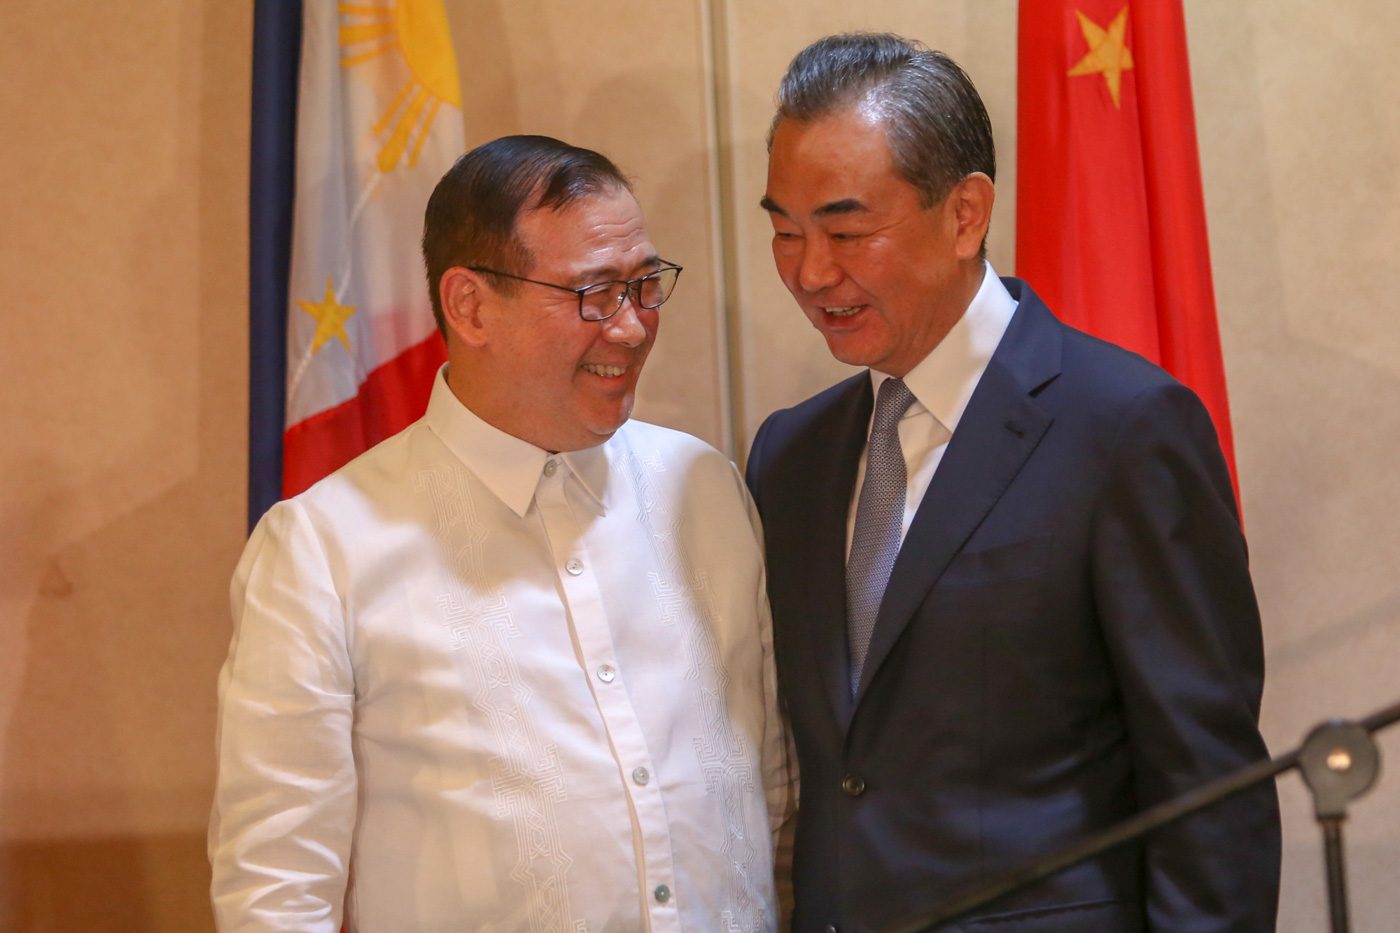 China’s foreign minister Wang Yi to visit Philippines